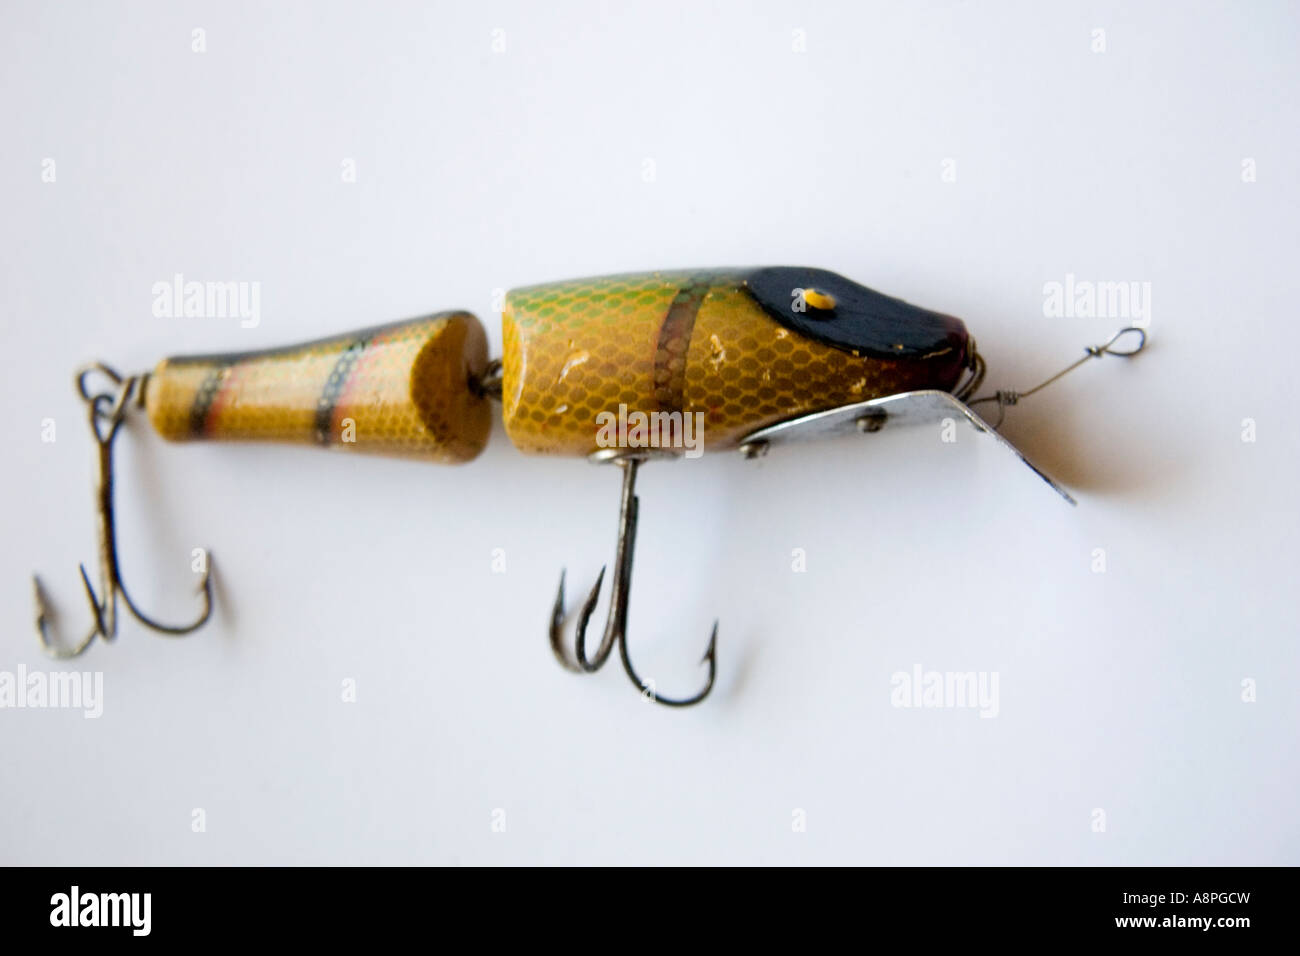 https://c8.alamy.com/comp/A8PGCW/close-up-of-a-jointed-antique-river-runt-like-fishing-lure-st-paul-A8PGCW.jpg